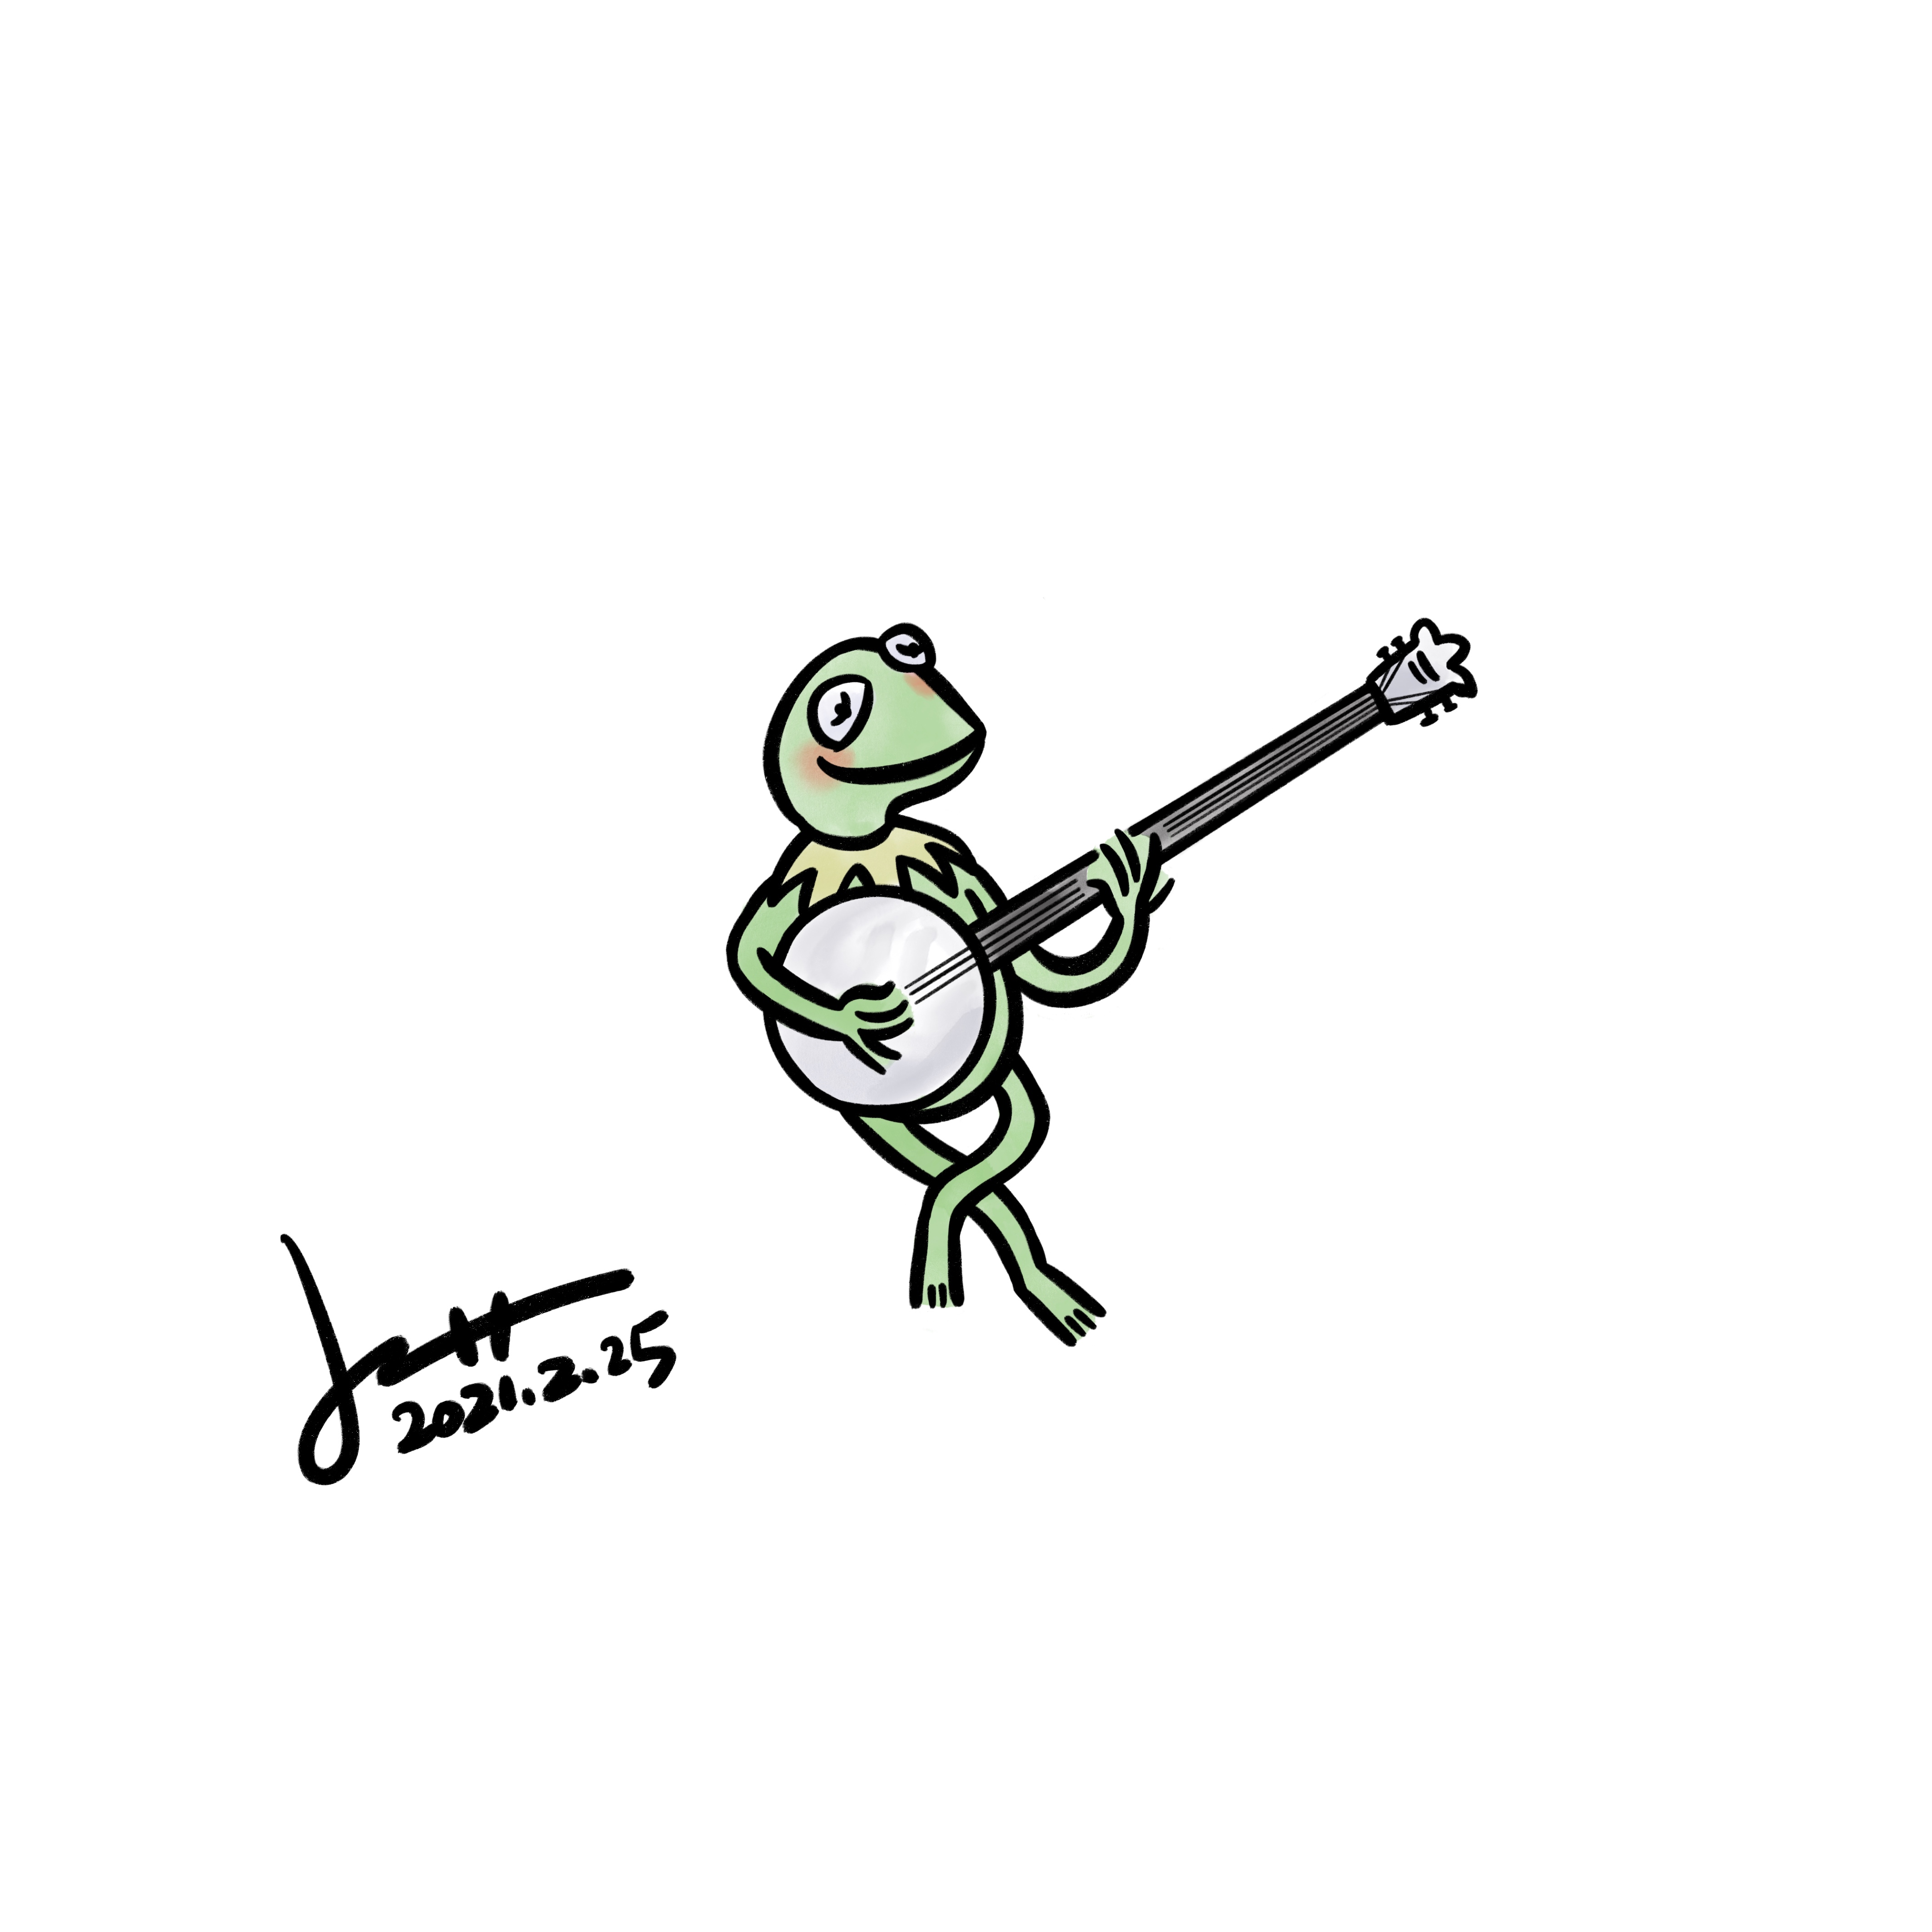 Kermit the Frog – Drawings – MarchBox